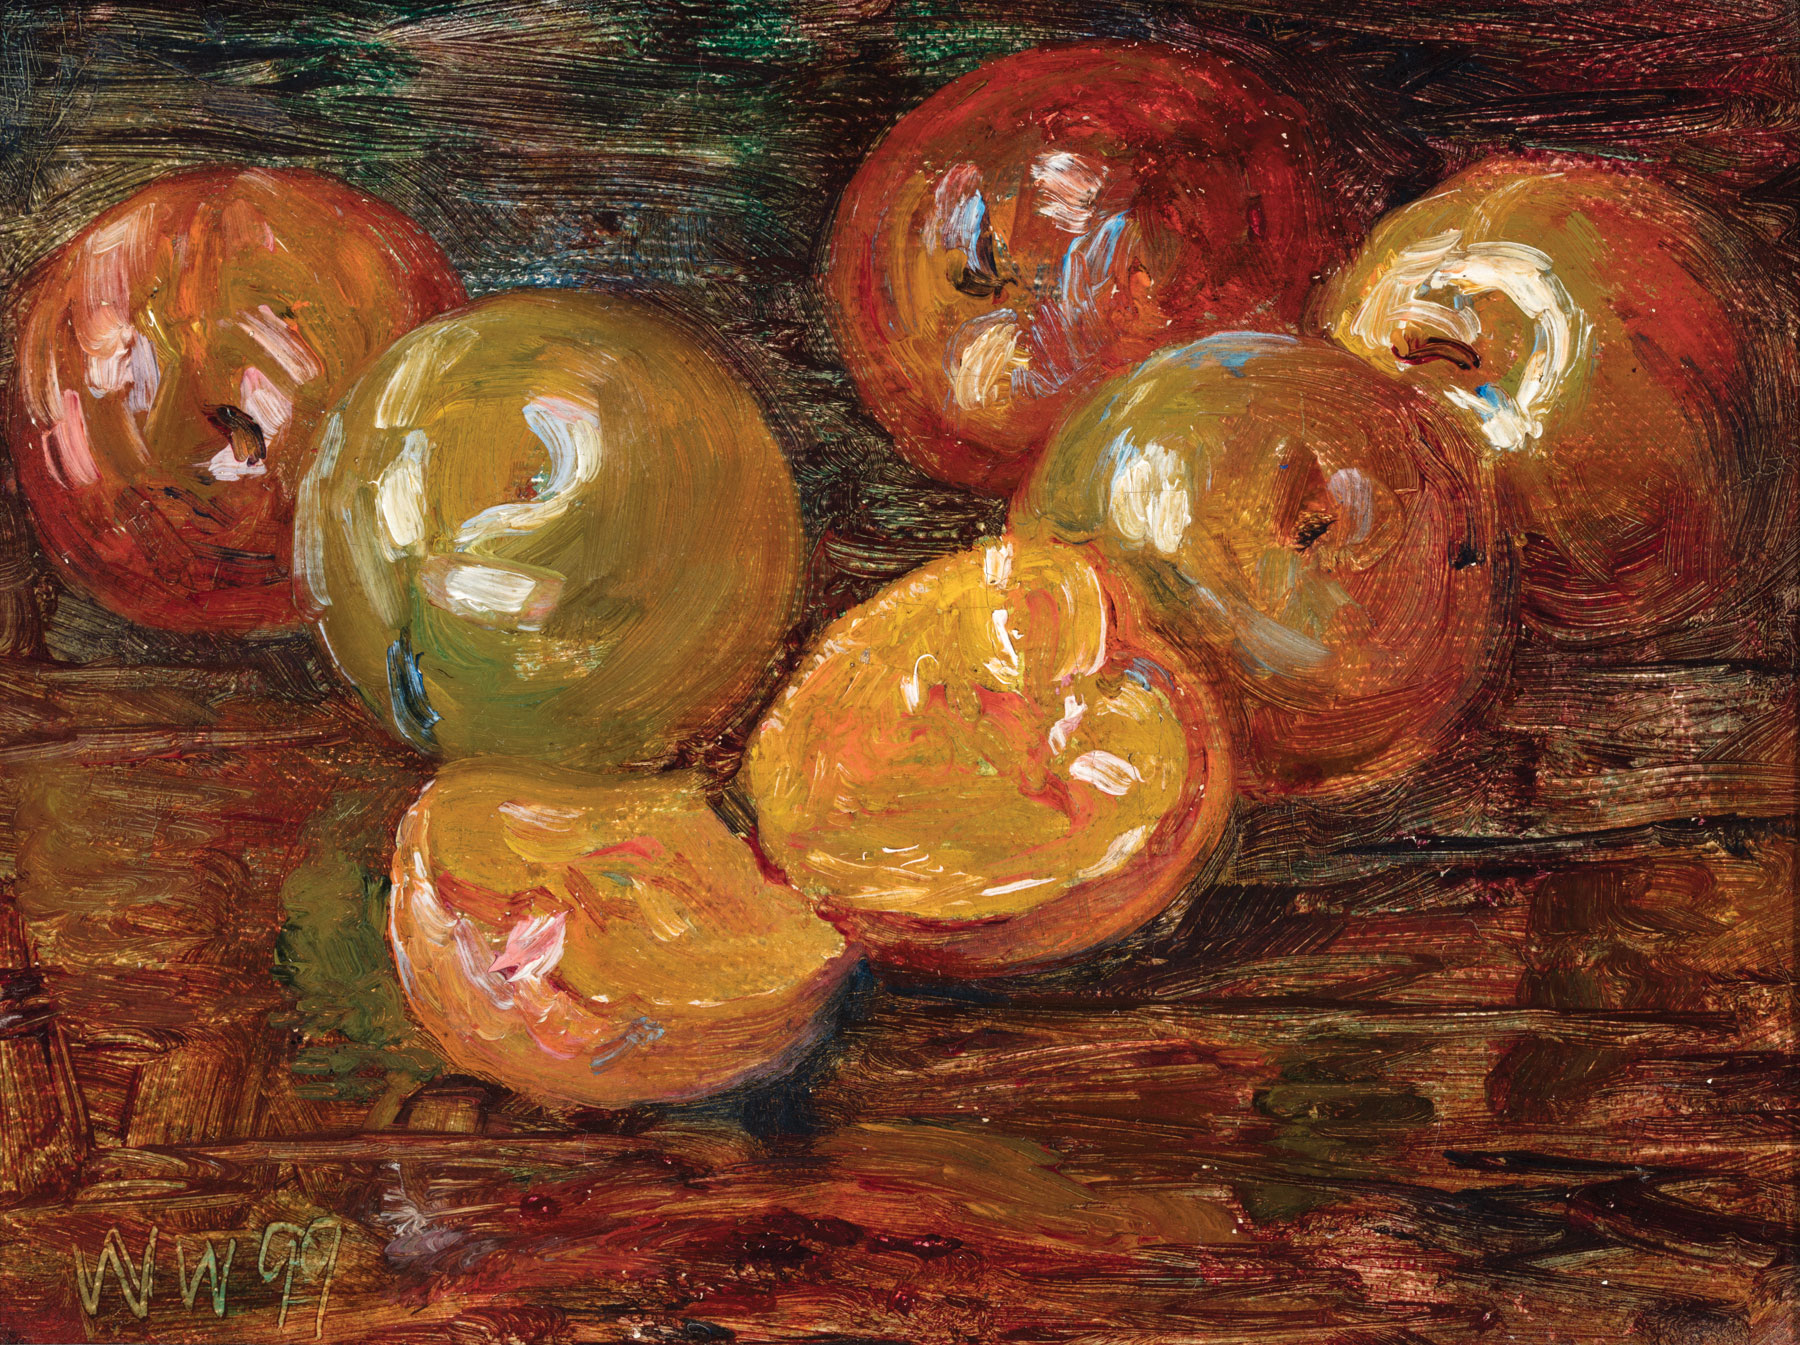 William Woodward (American/Louisiana, 1859-1939), "Untitled (Creole Tomatoes)", 1899, oil on canvas, - Image 2 of 4